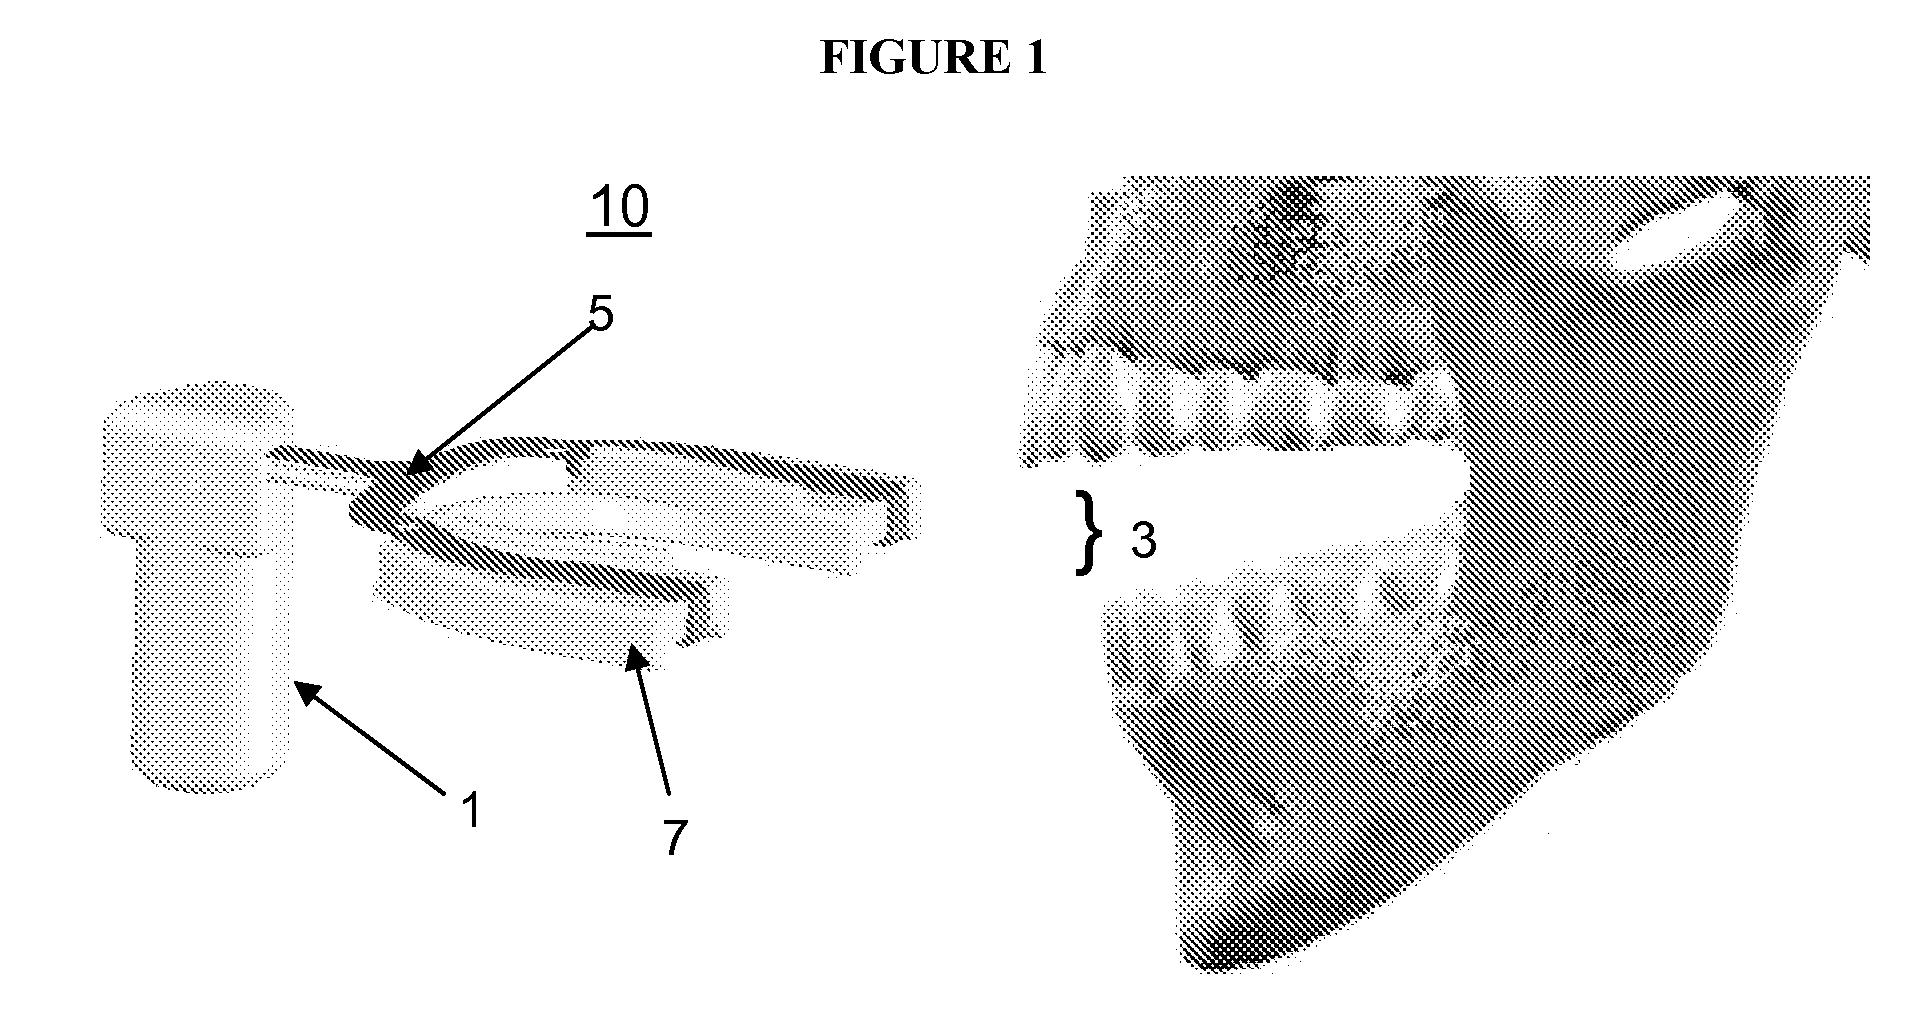 Vibrating compressible dental plate for correcting malocclusion